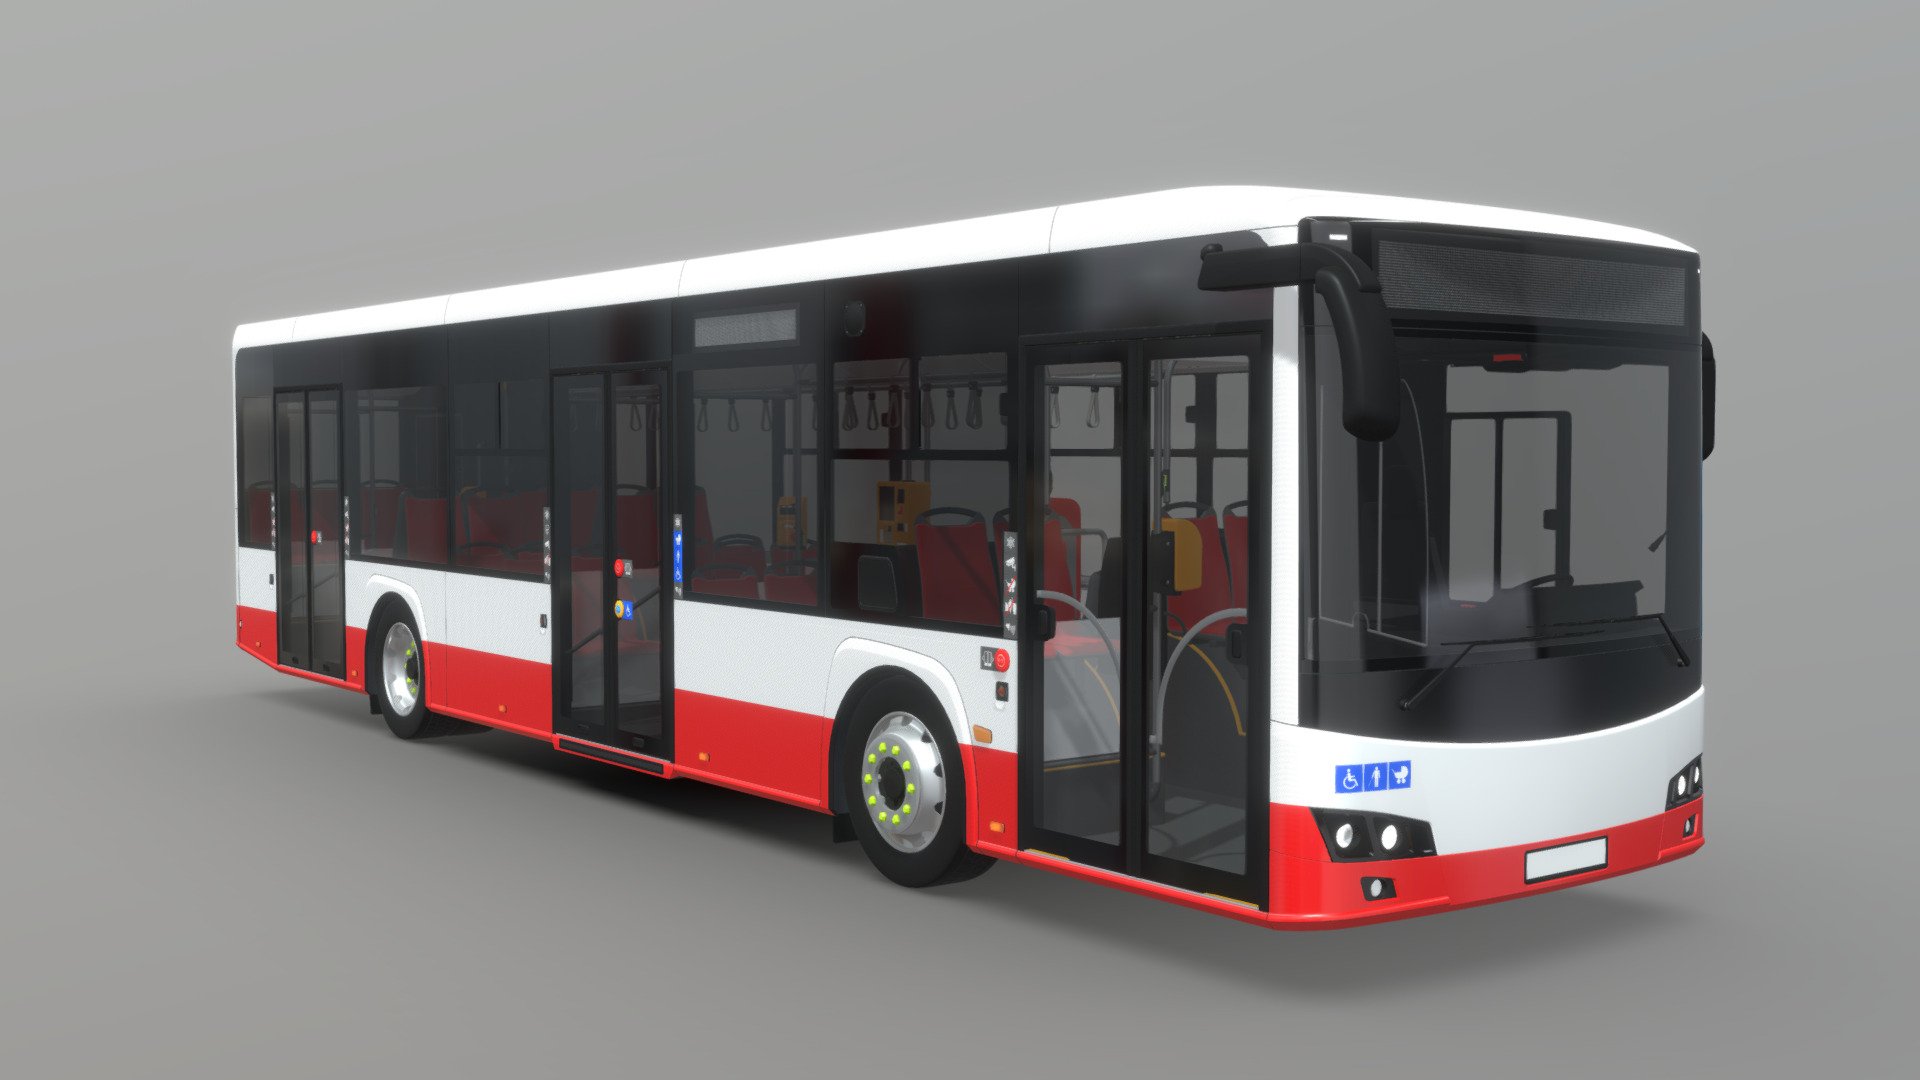 Model presents a new entry to my bus collection. It's a first out of an upcoming family of II generation buses which will include new original, high-poly design. This is a 12-meter version of a hybrid bus, which offers 31 seats, and features new outward swinging, pneumatic doors 3d model